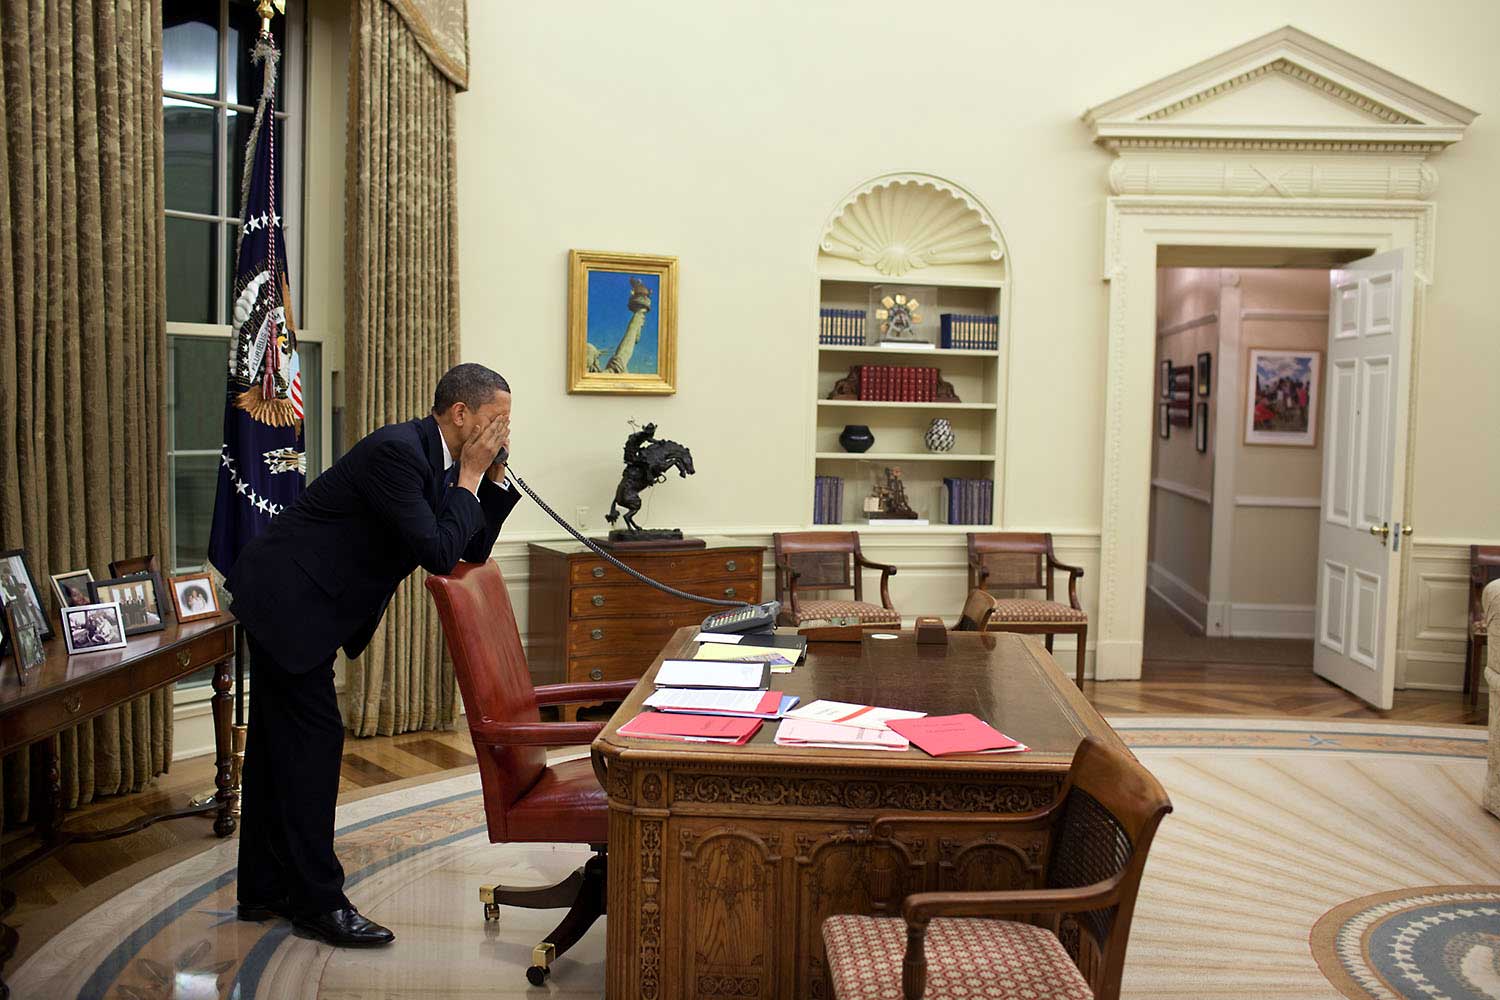 After dinner with his family on March 19, 2009, the President works the phone in the Oval Office to continue pressing Congressmen to vote for the health care reform bill.